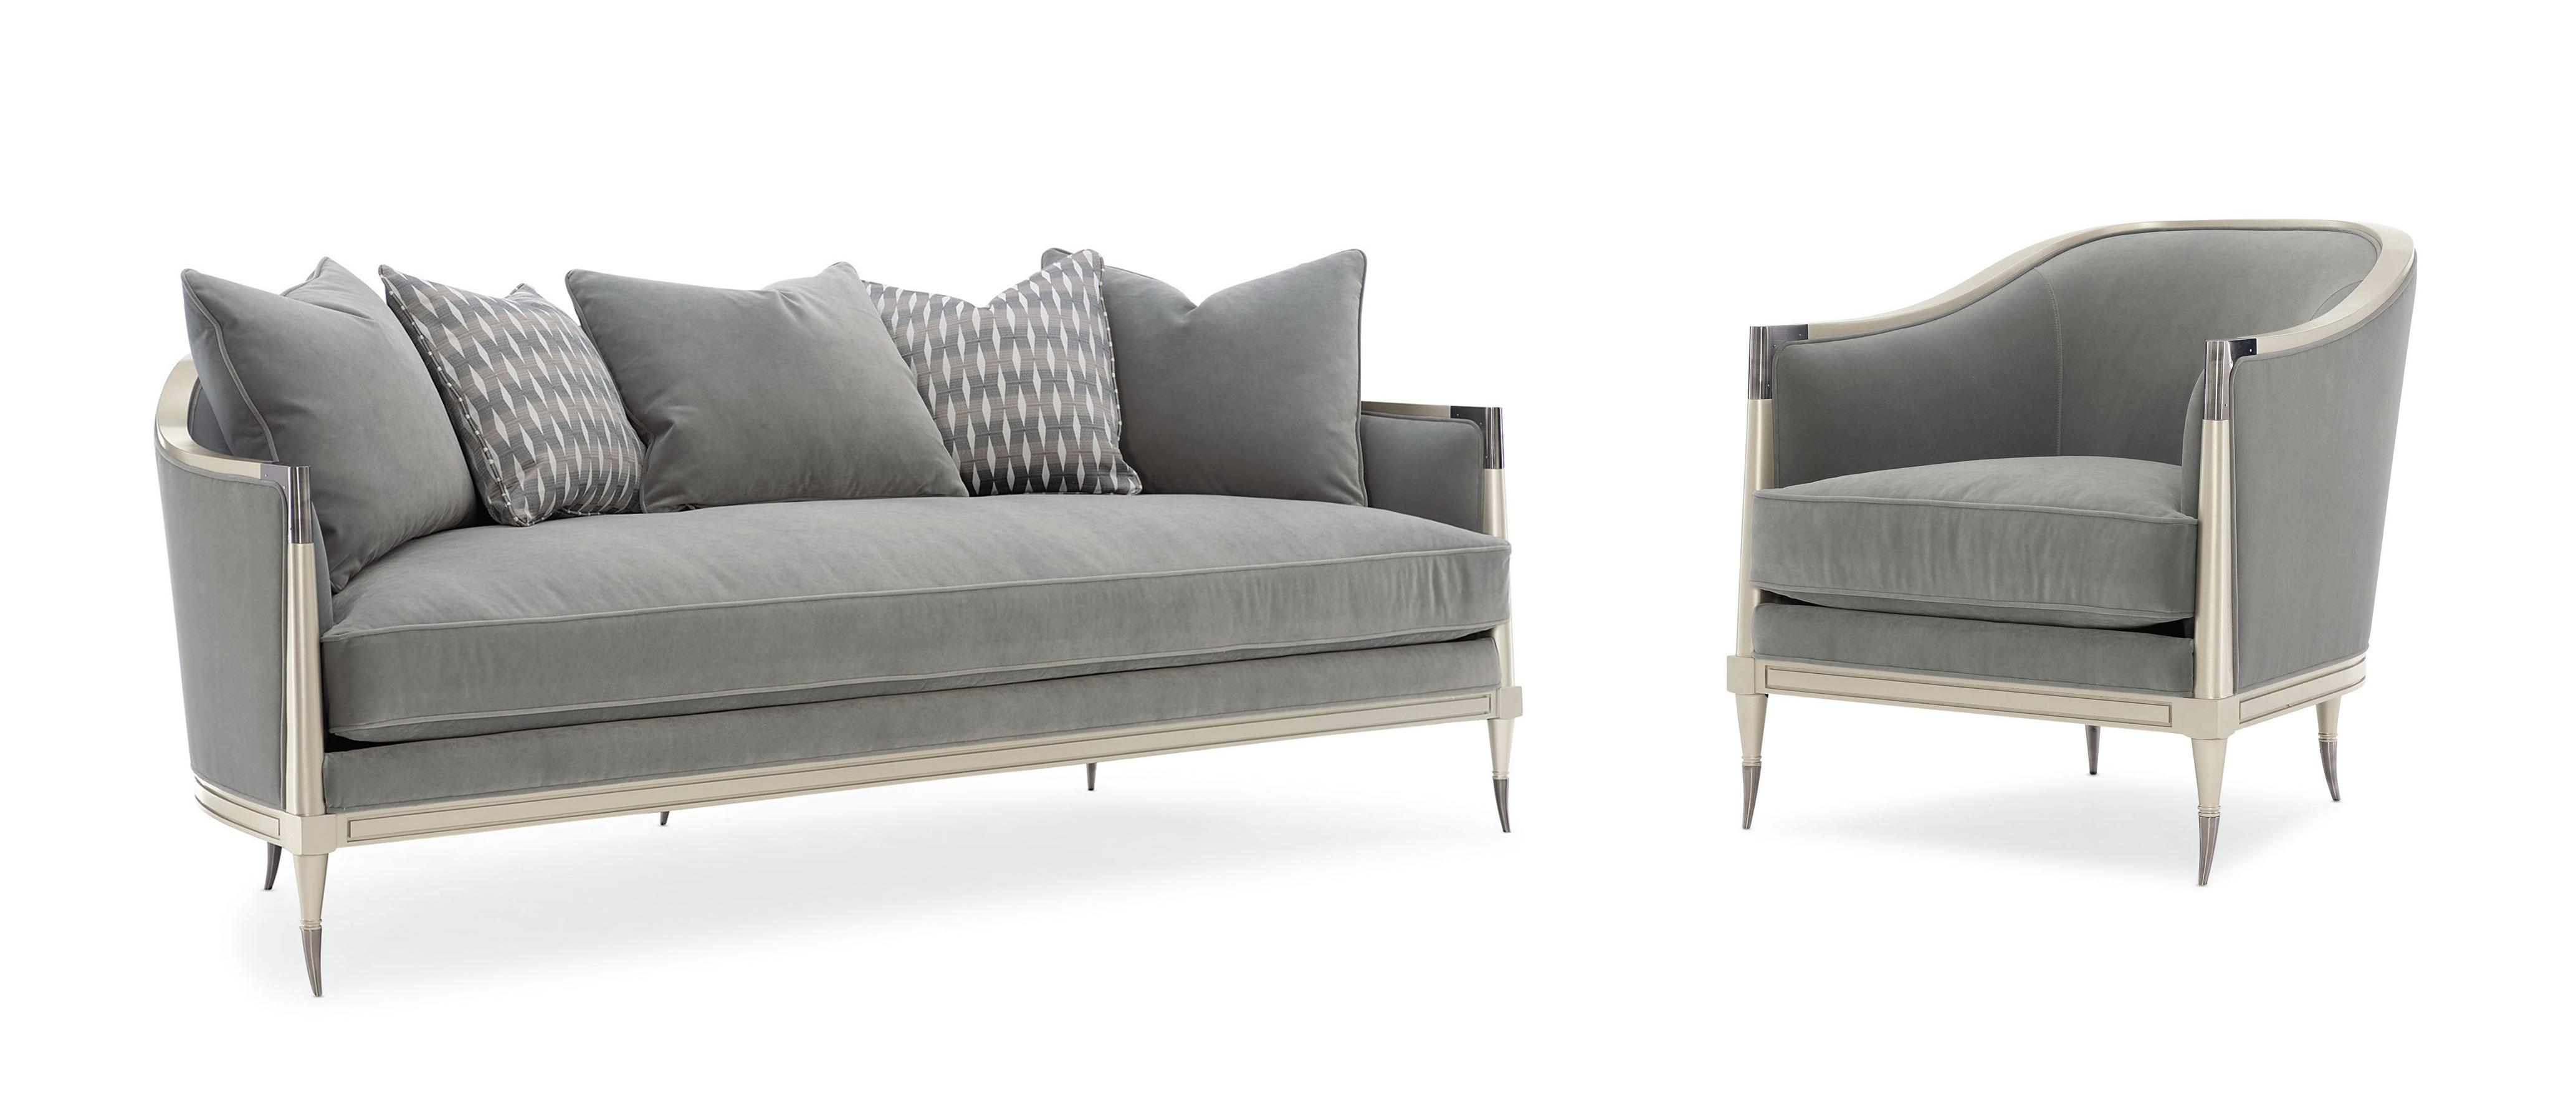 Traditional Sofa and Chair SPLASH OF FLASH UPH-420-112-A-Set-2 in Silver, Gray Fabric